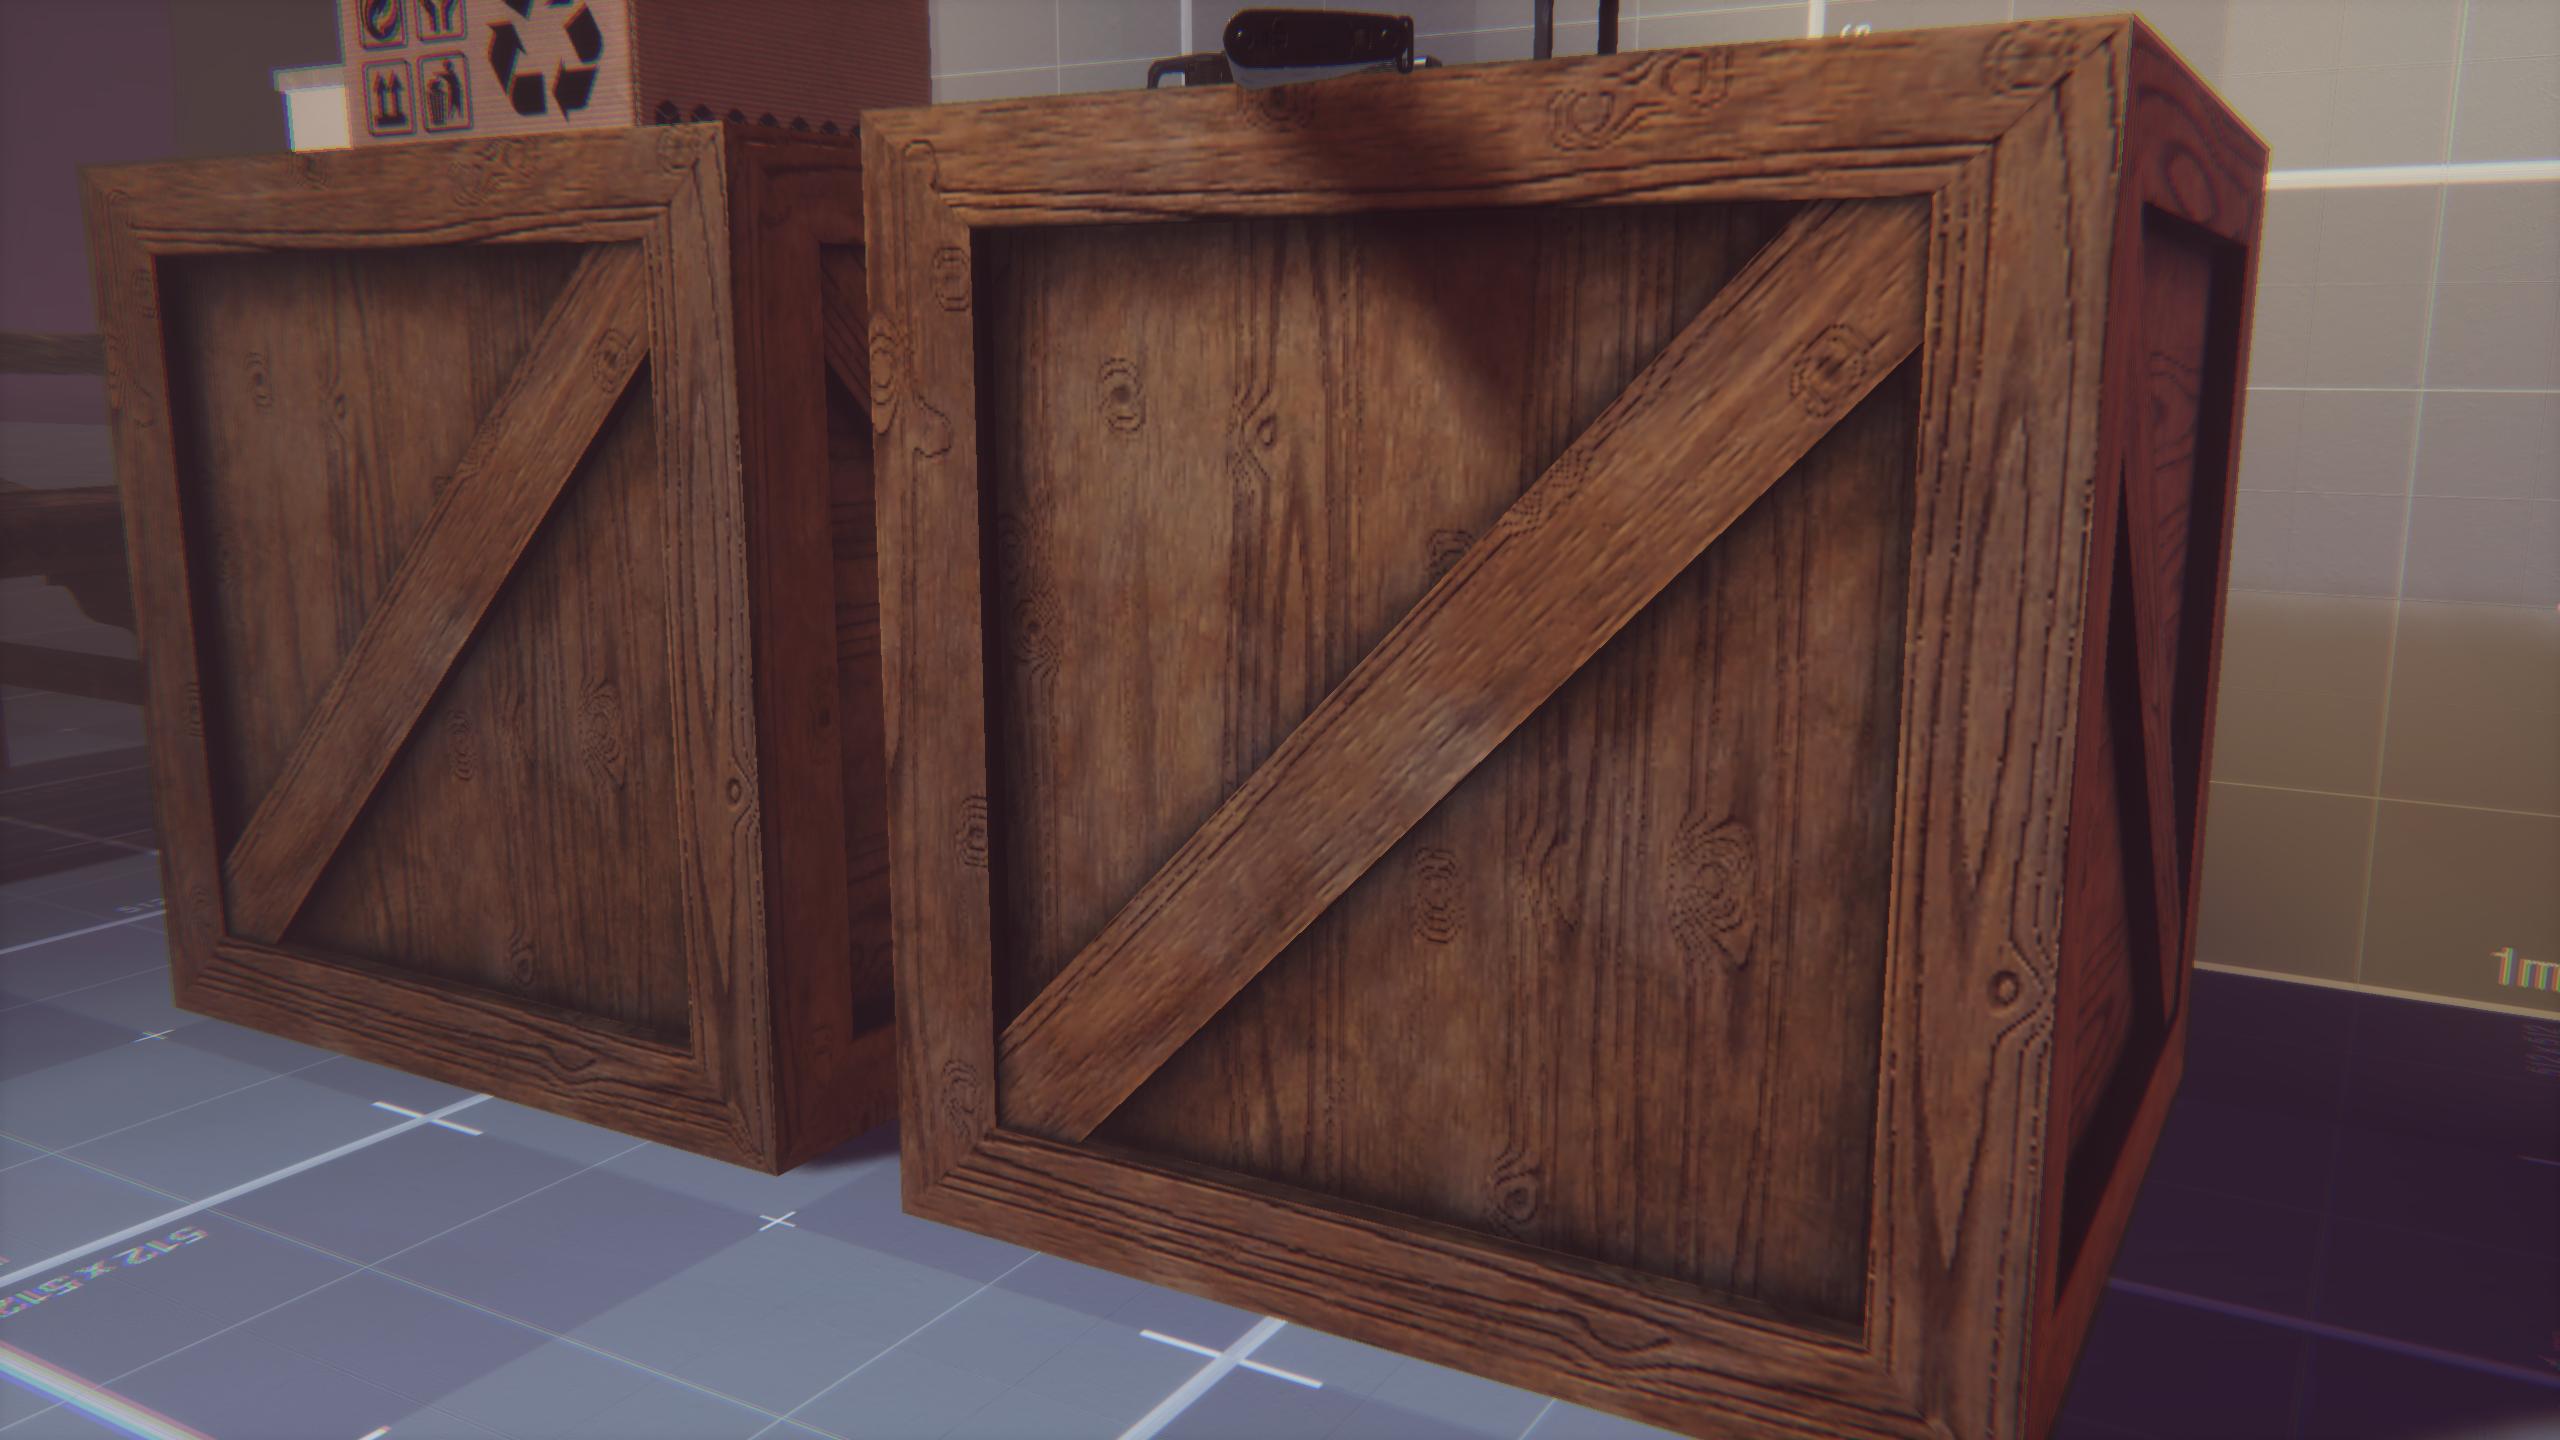 Crate with very soft, undefined ambient occlusion